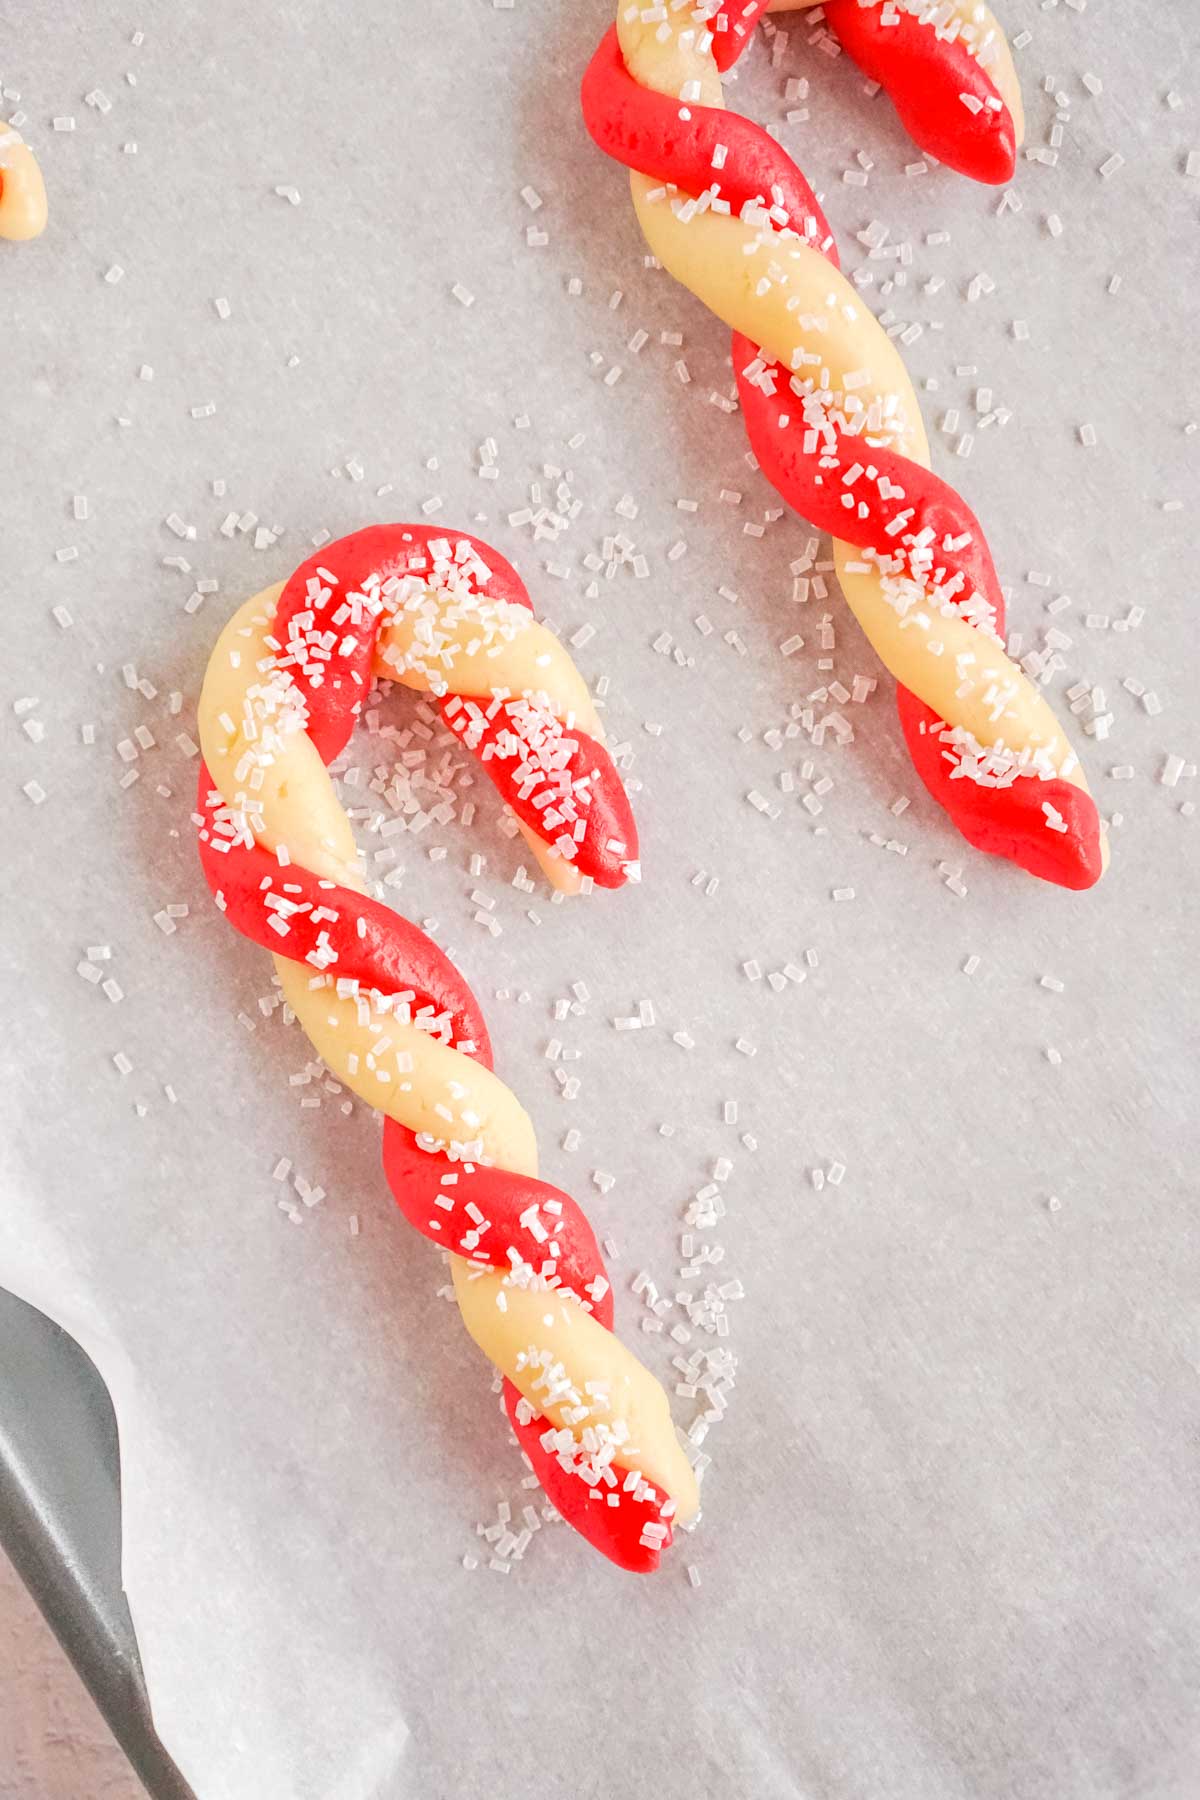 unbaked candy canes sprinkled with sugar